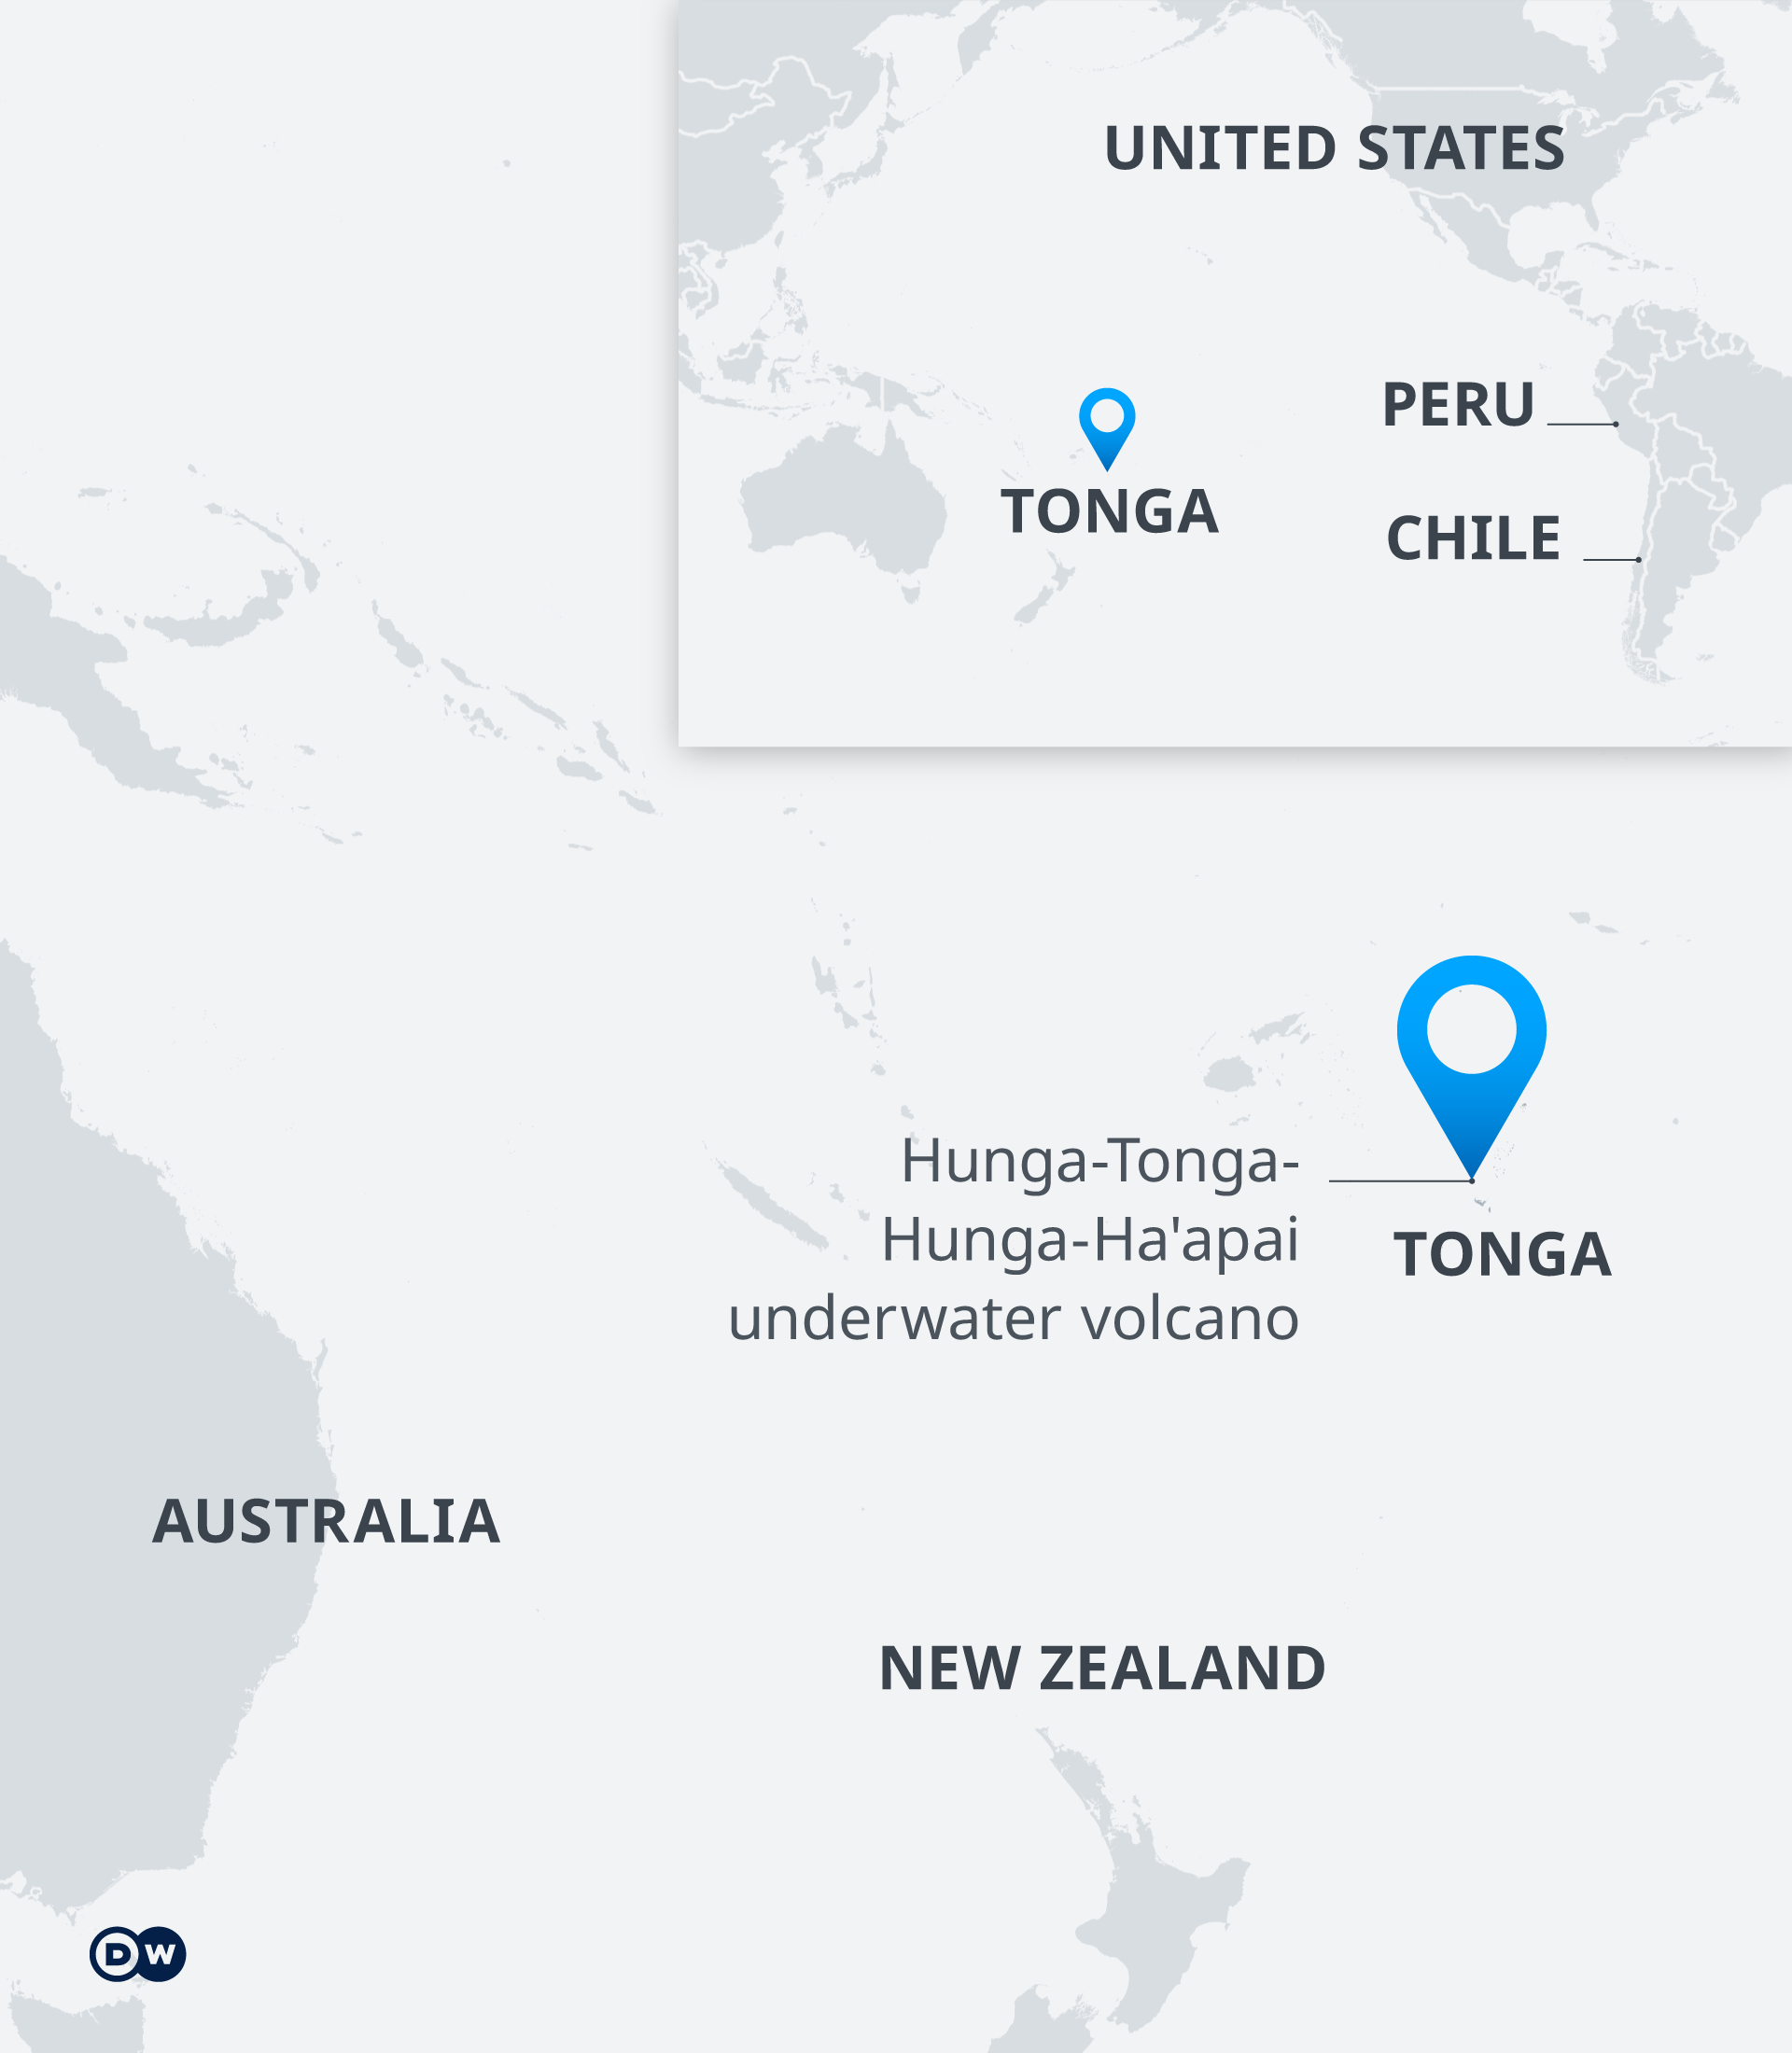 A map of Tonga and areas affected by a volcanic eruption